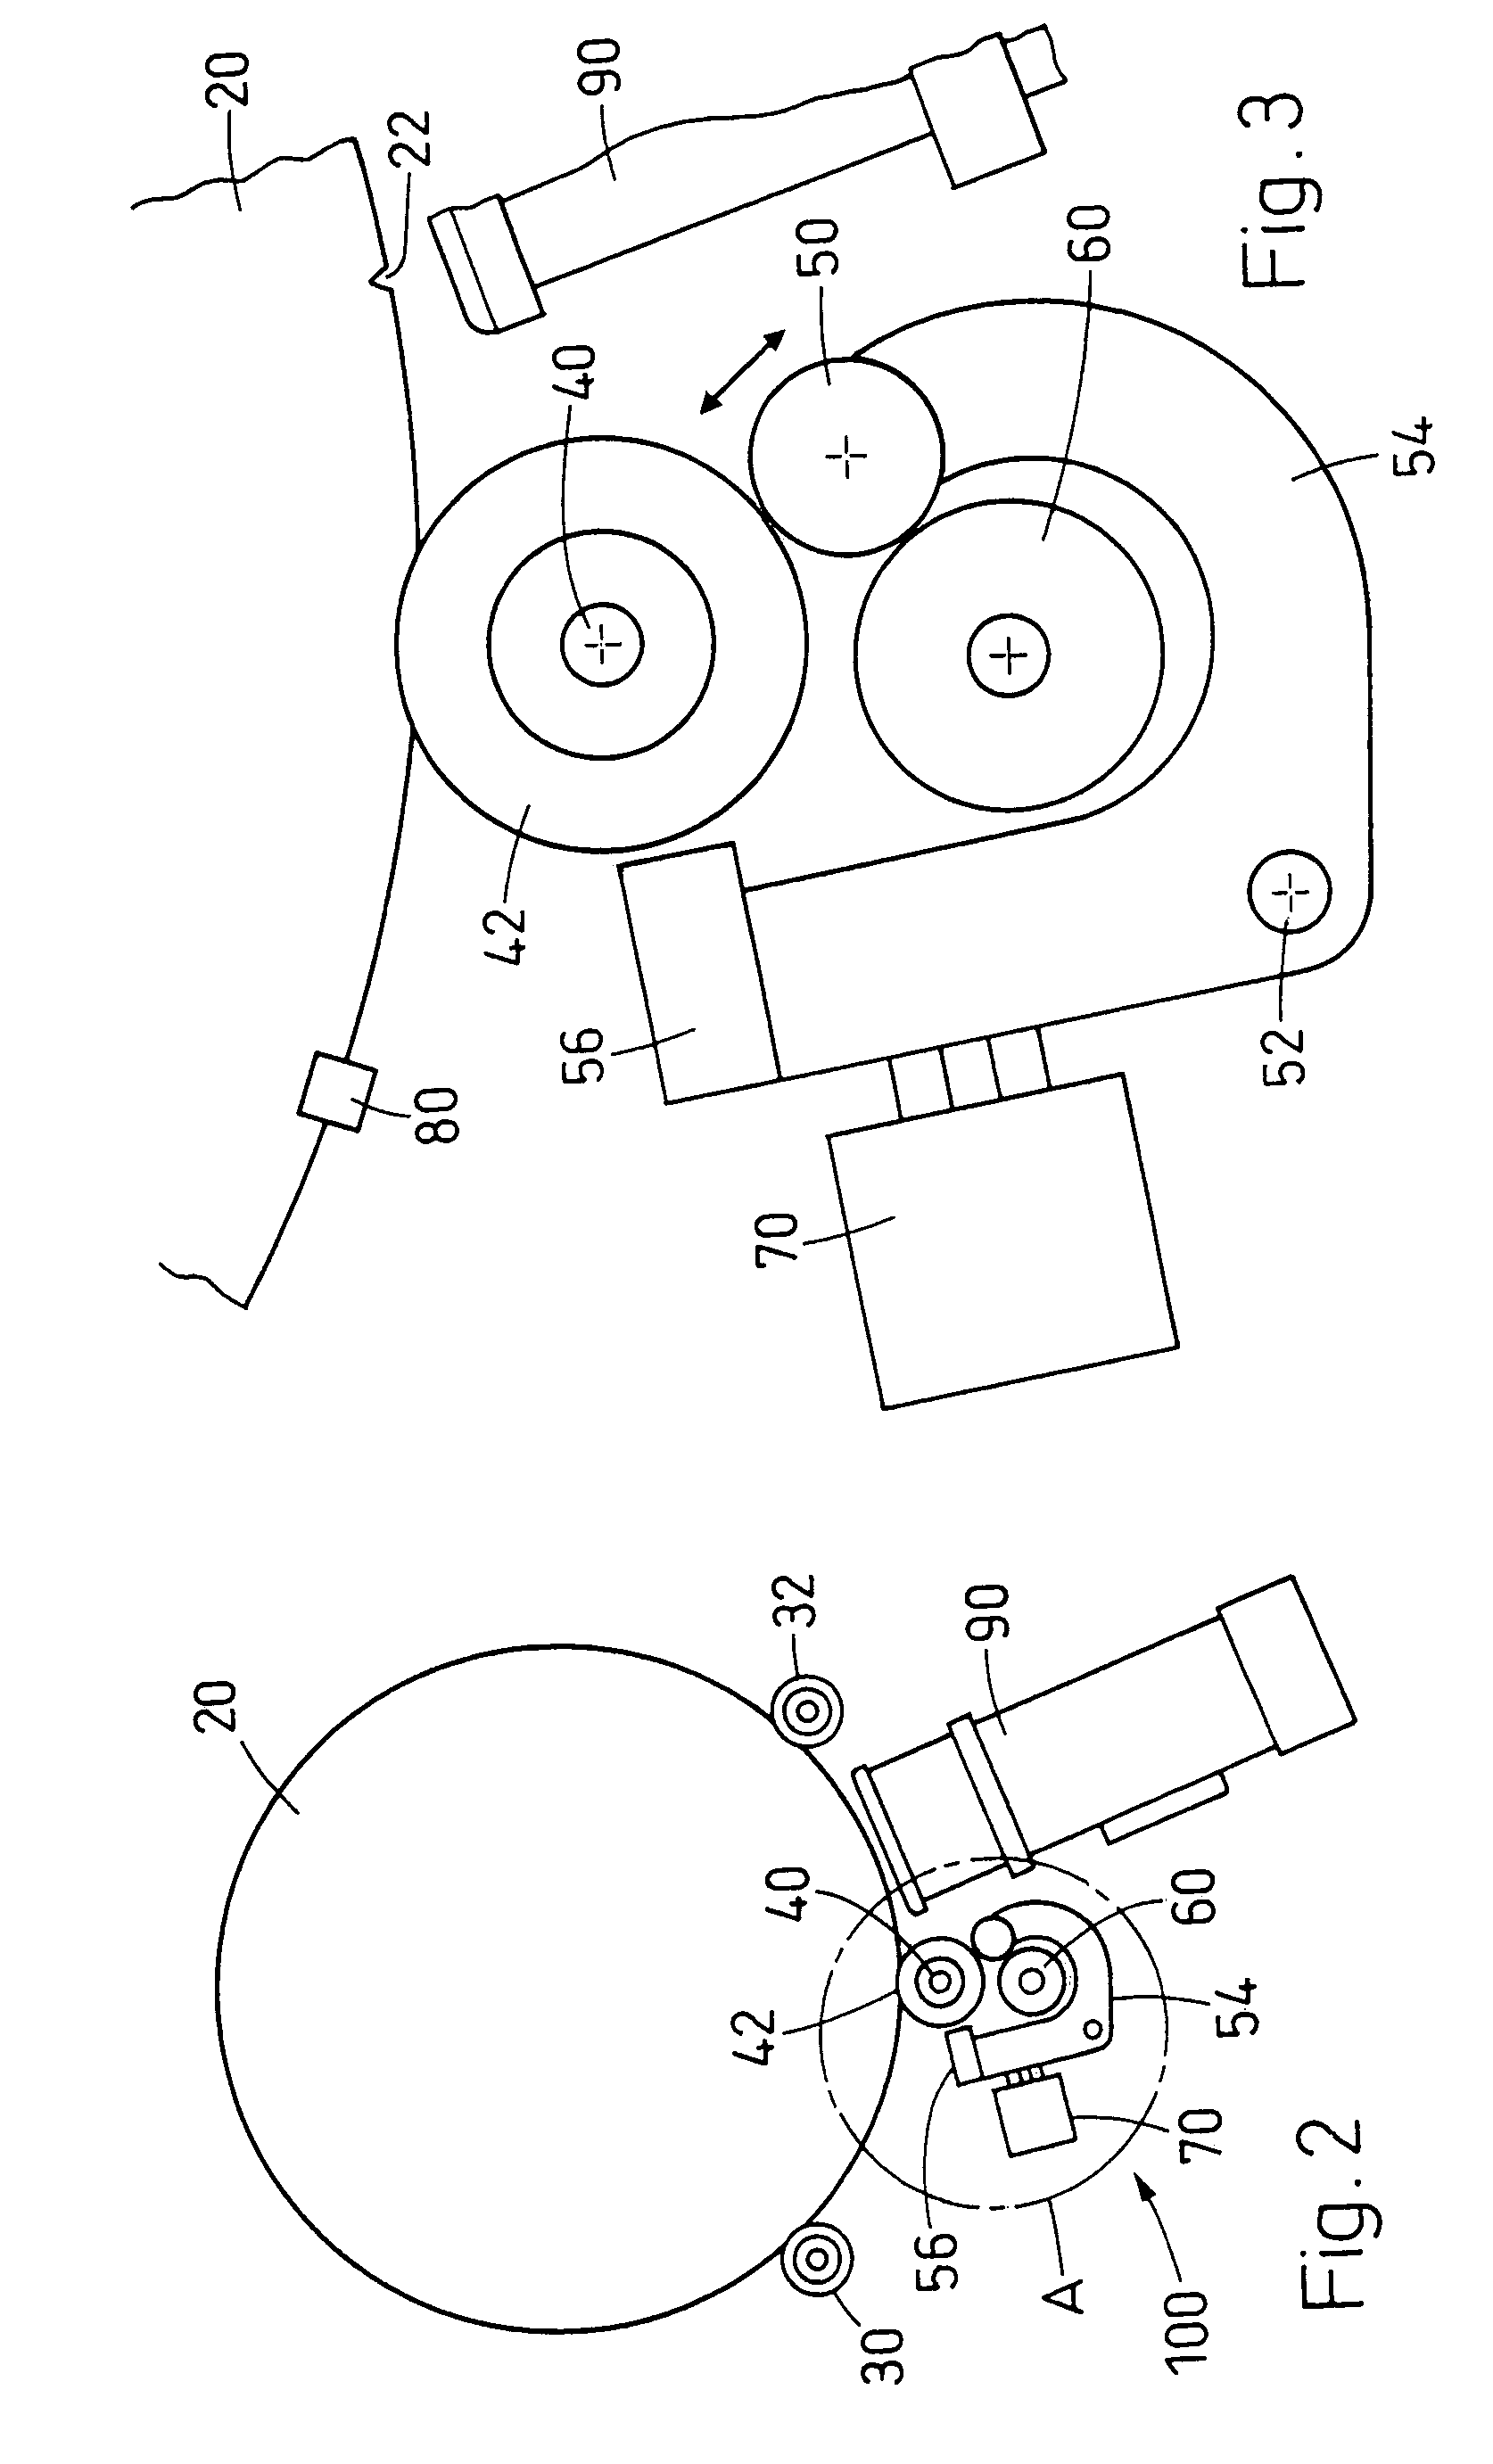 Device and method for the harmonized positioning of wafer disks